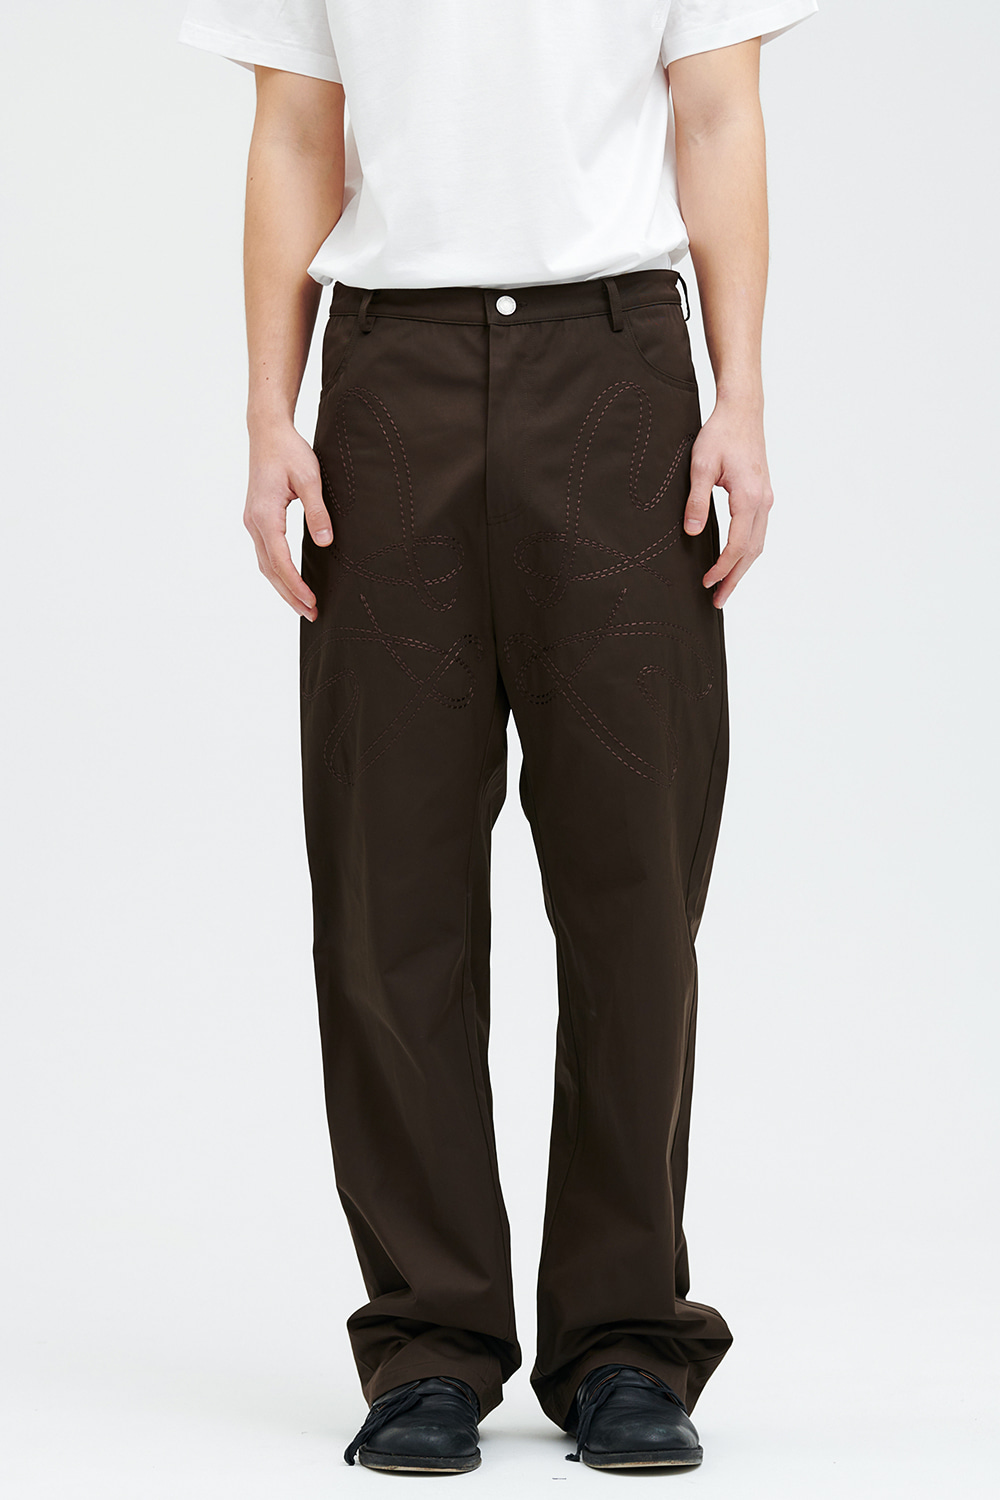 Pansy Lettering Pants-Brown